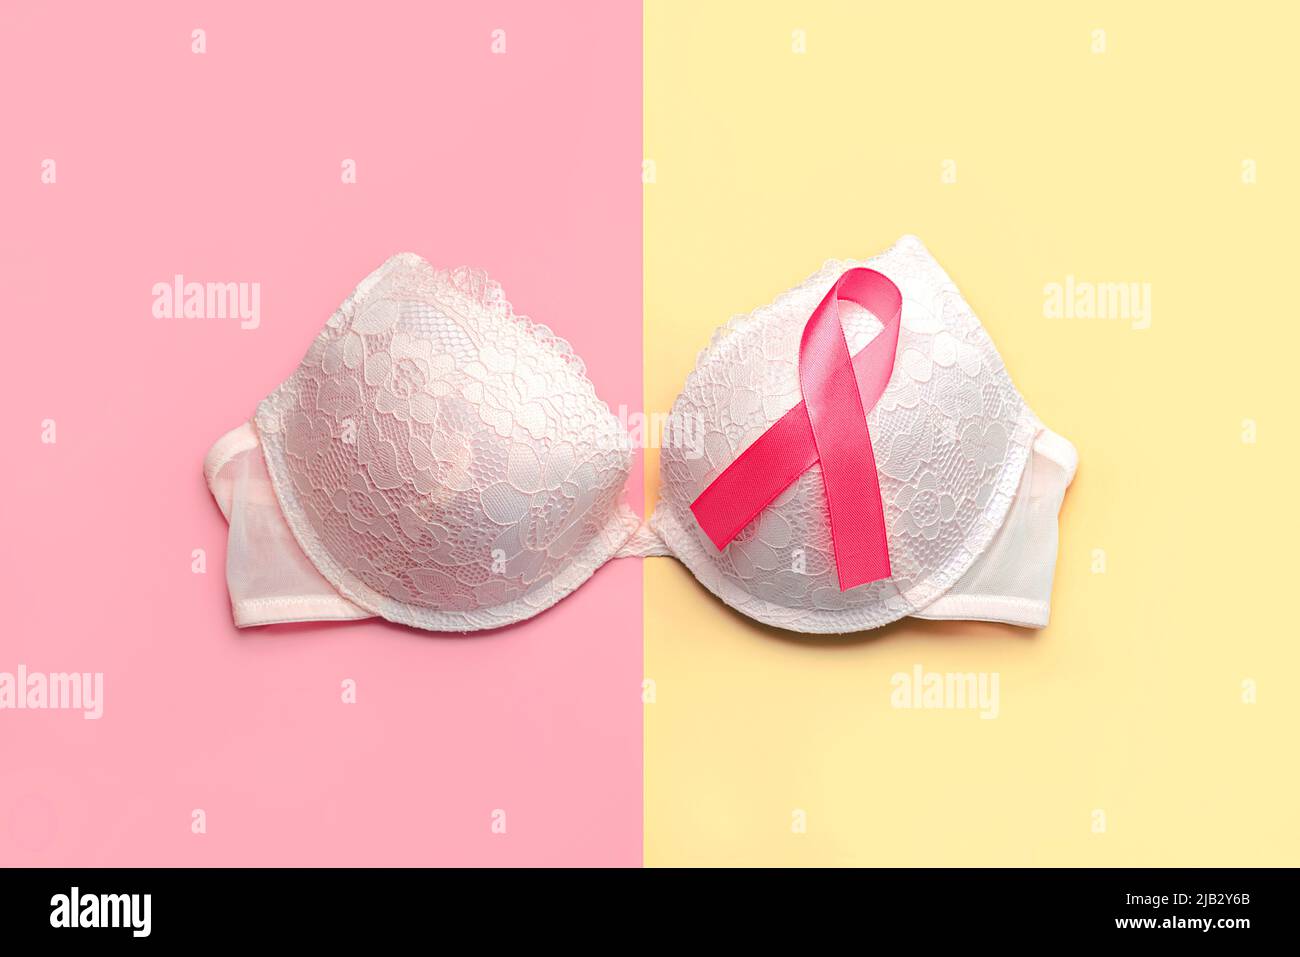 Breast cancer concept. Top view of Women's bra and pink ribbon symbol breast cancer awareness over pink and yellow background Stock Photo